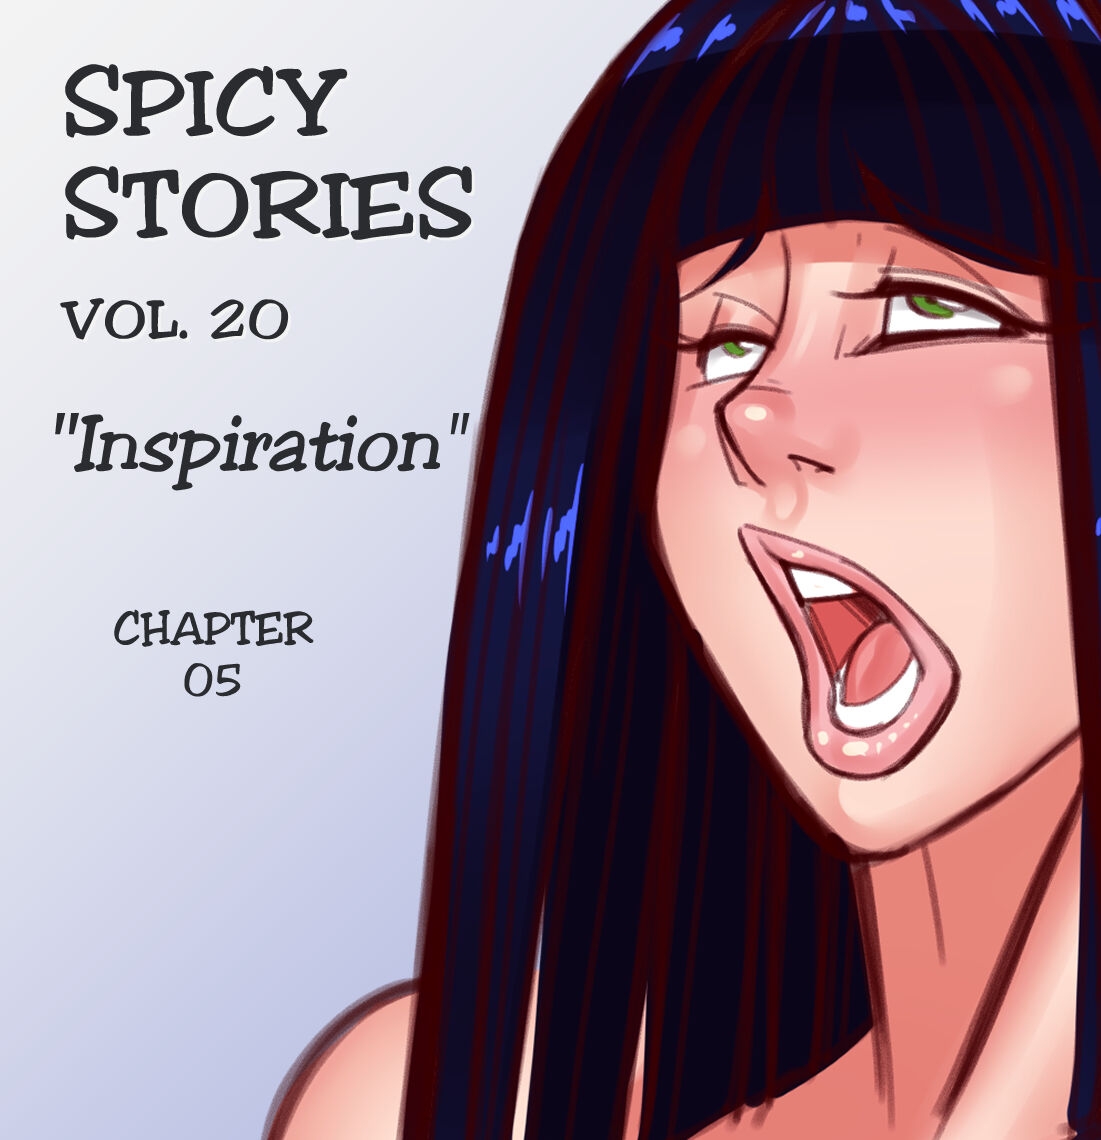 [NGTvisualstudio] NGT Spicy Stories 20 - Inspiration (Ongoing) 75